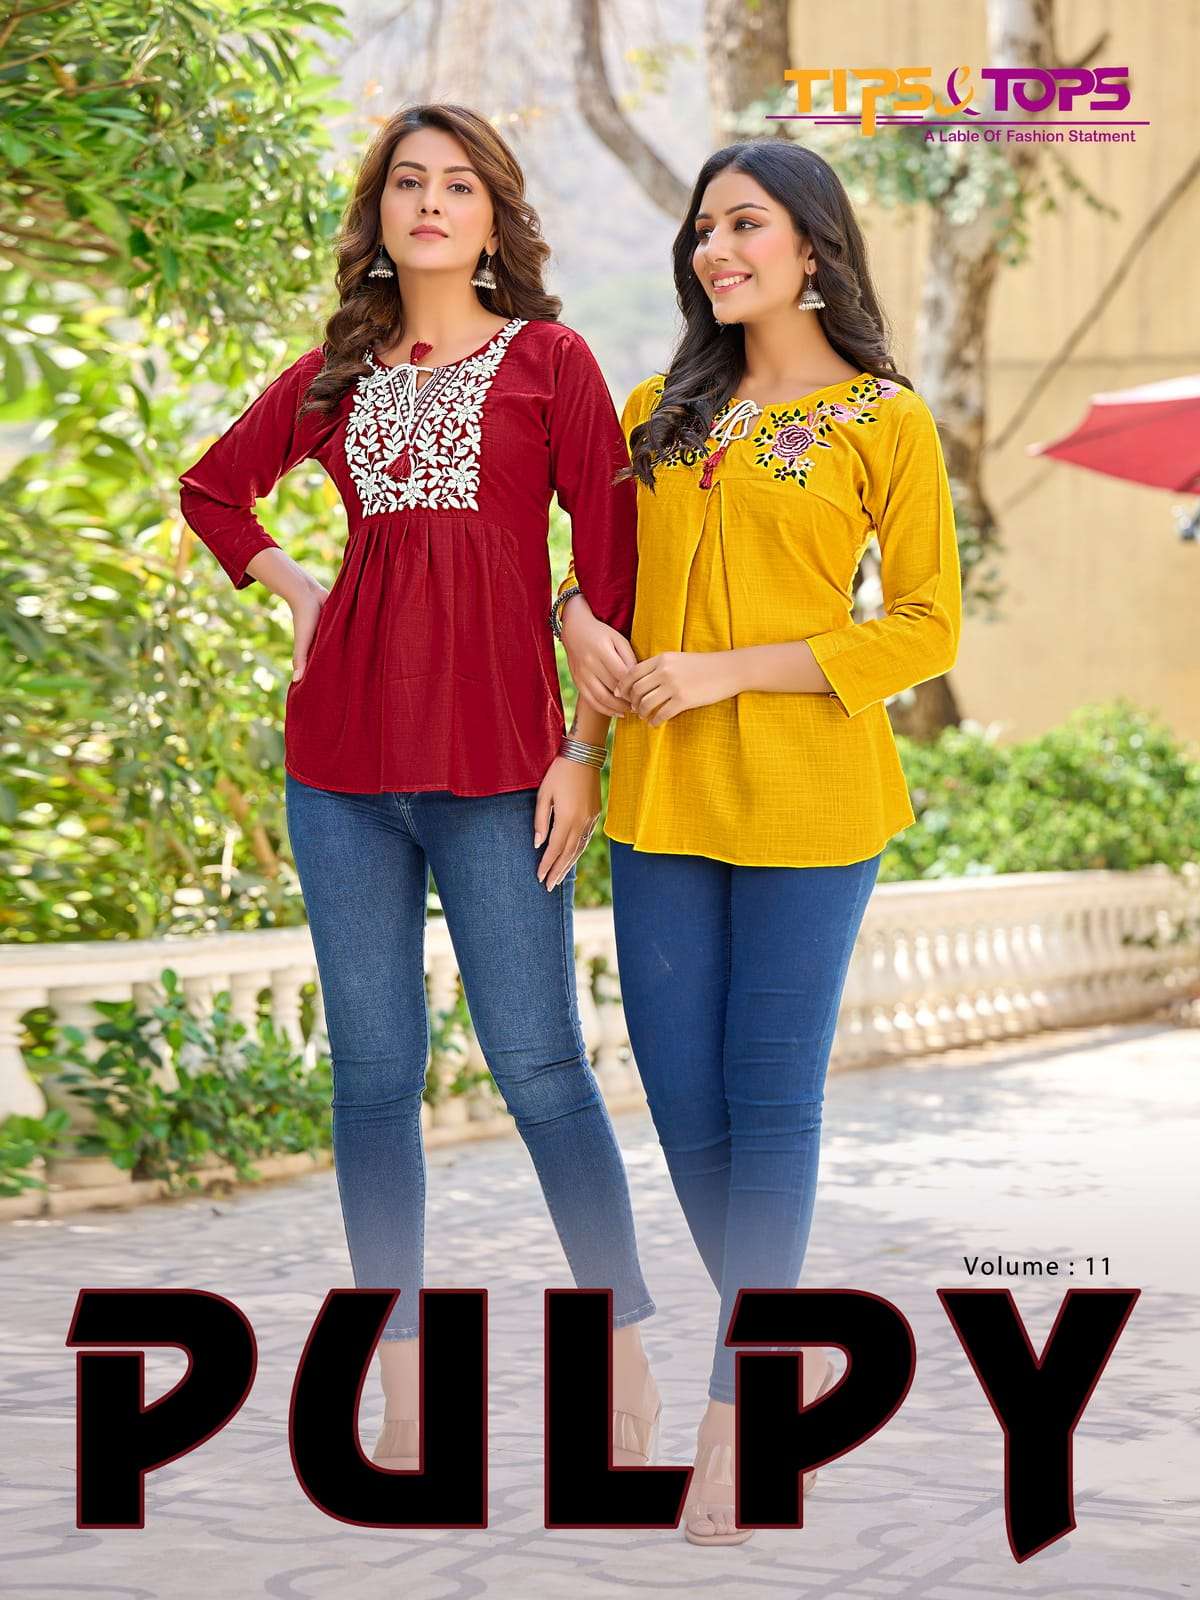 PULPY VOL 11 BY TIPS & TOPS PRESENTING NEW HEAVY FANCY DESIGNER HEAVY RAYON SLUB EMBRODIERY WORK REGULAR WEAR SHORT TOP COLLECTION WHOLESALER